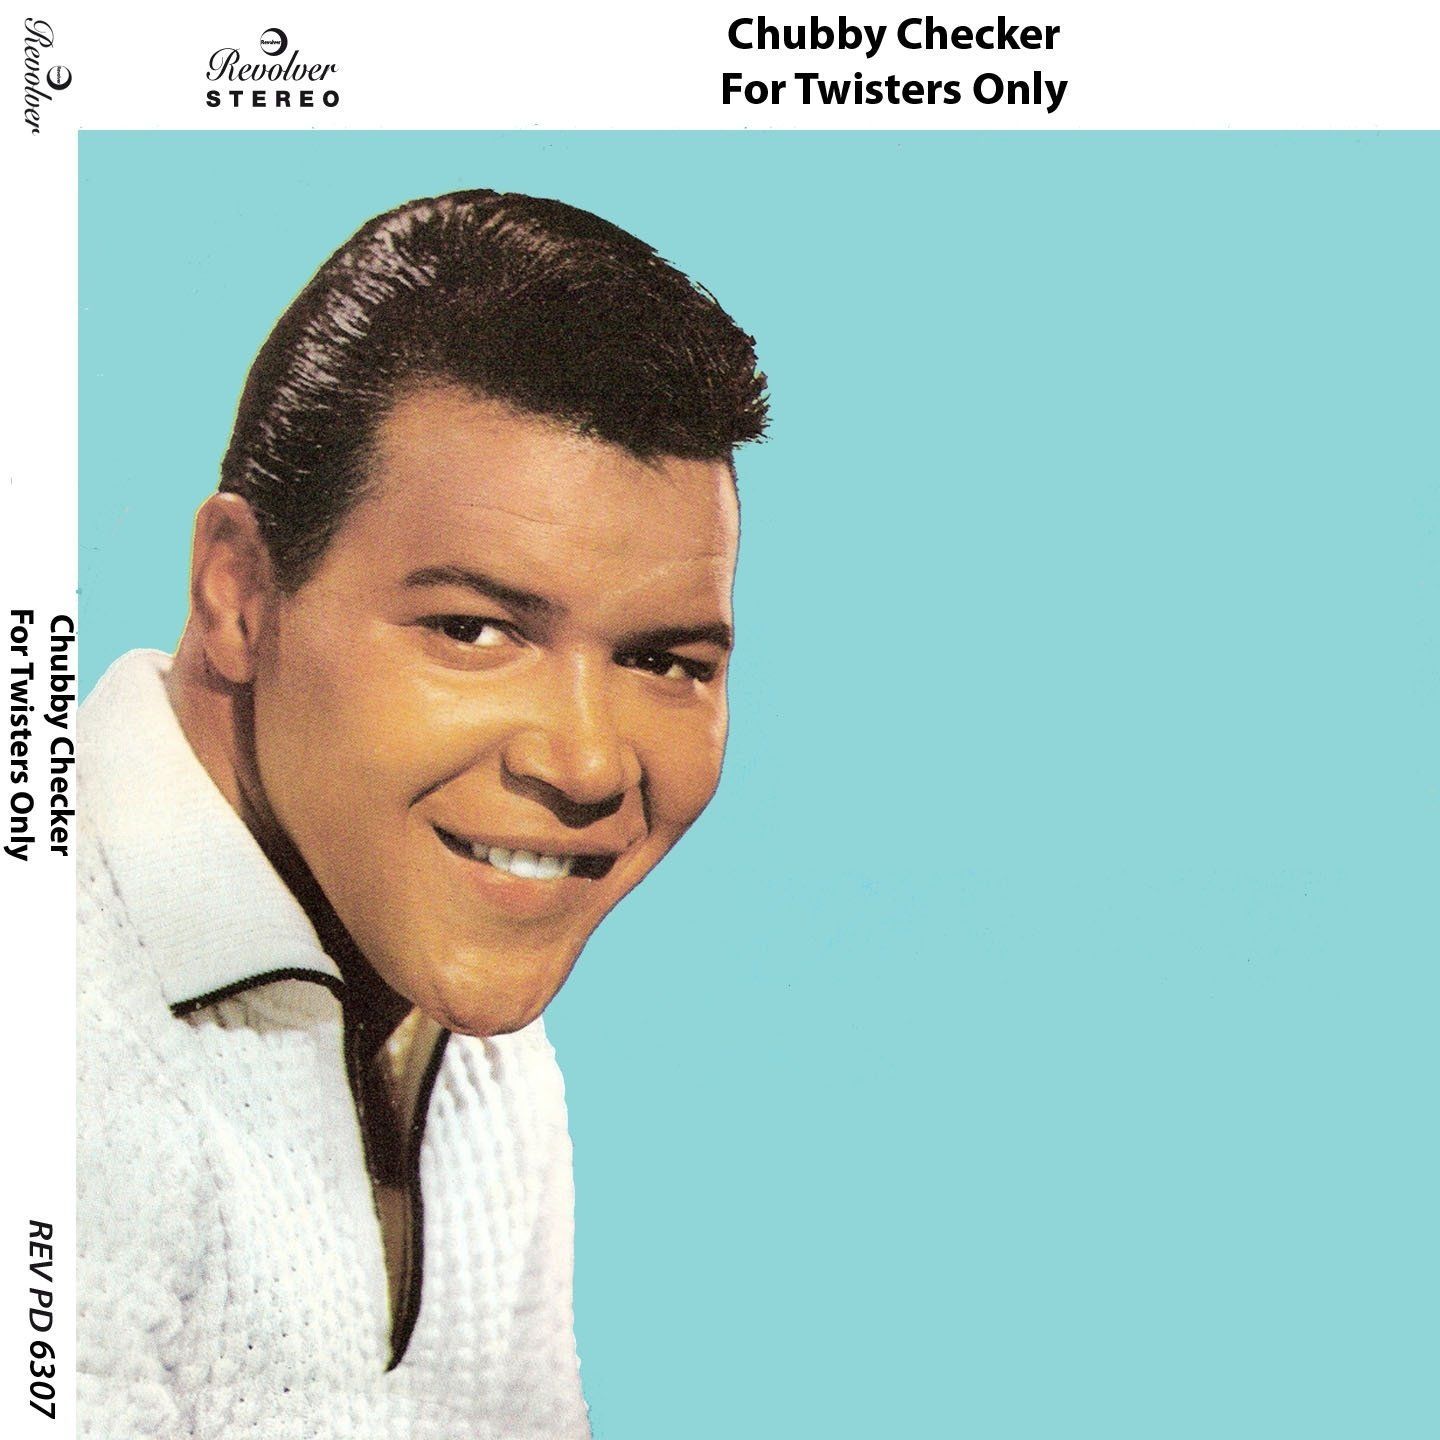 The twist by chubby cheaker